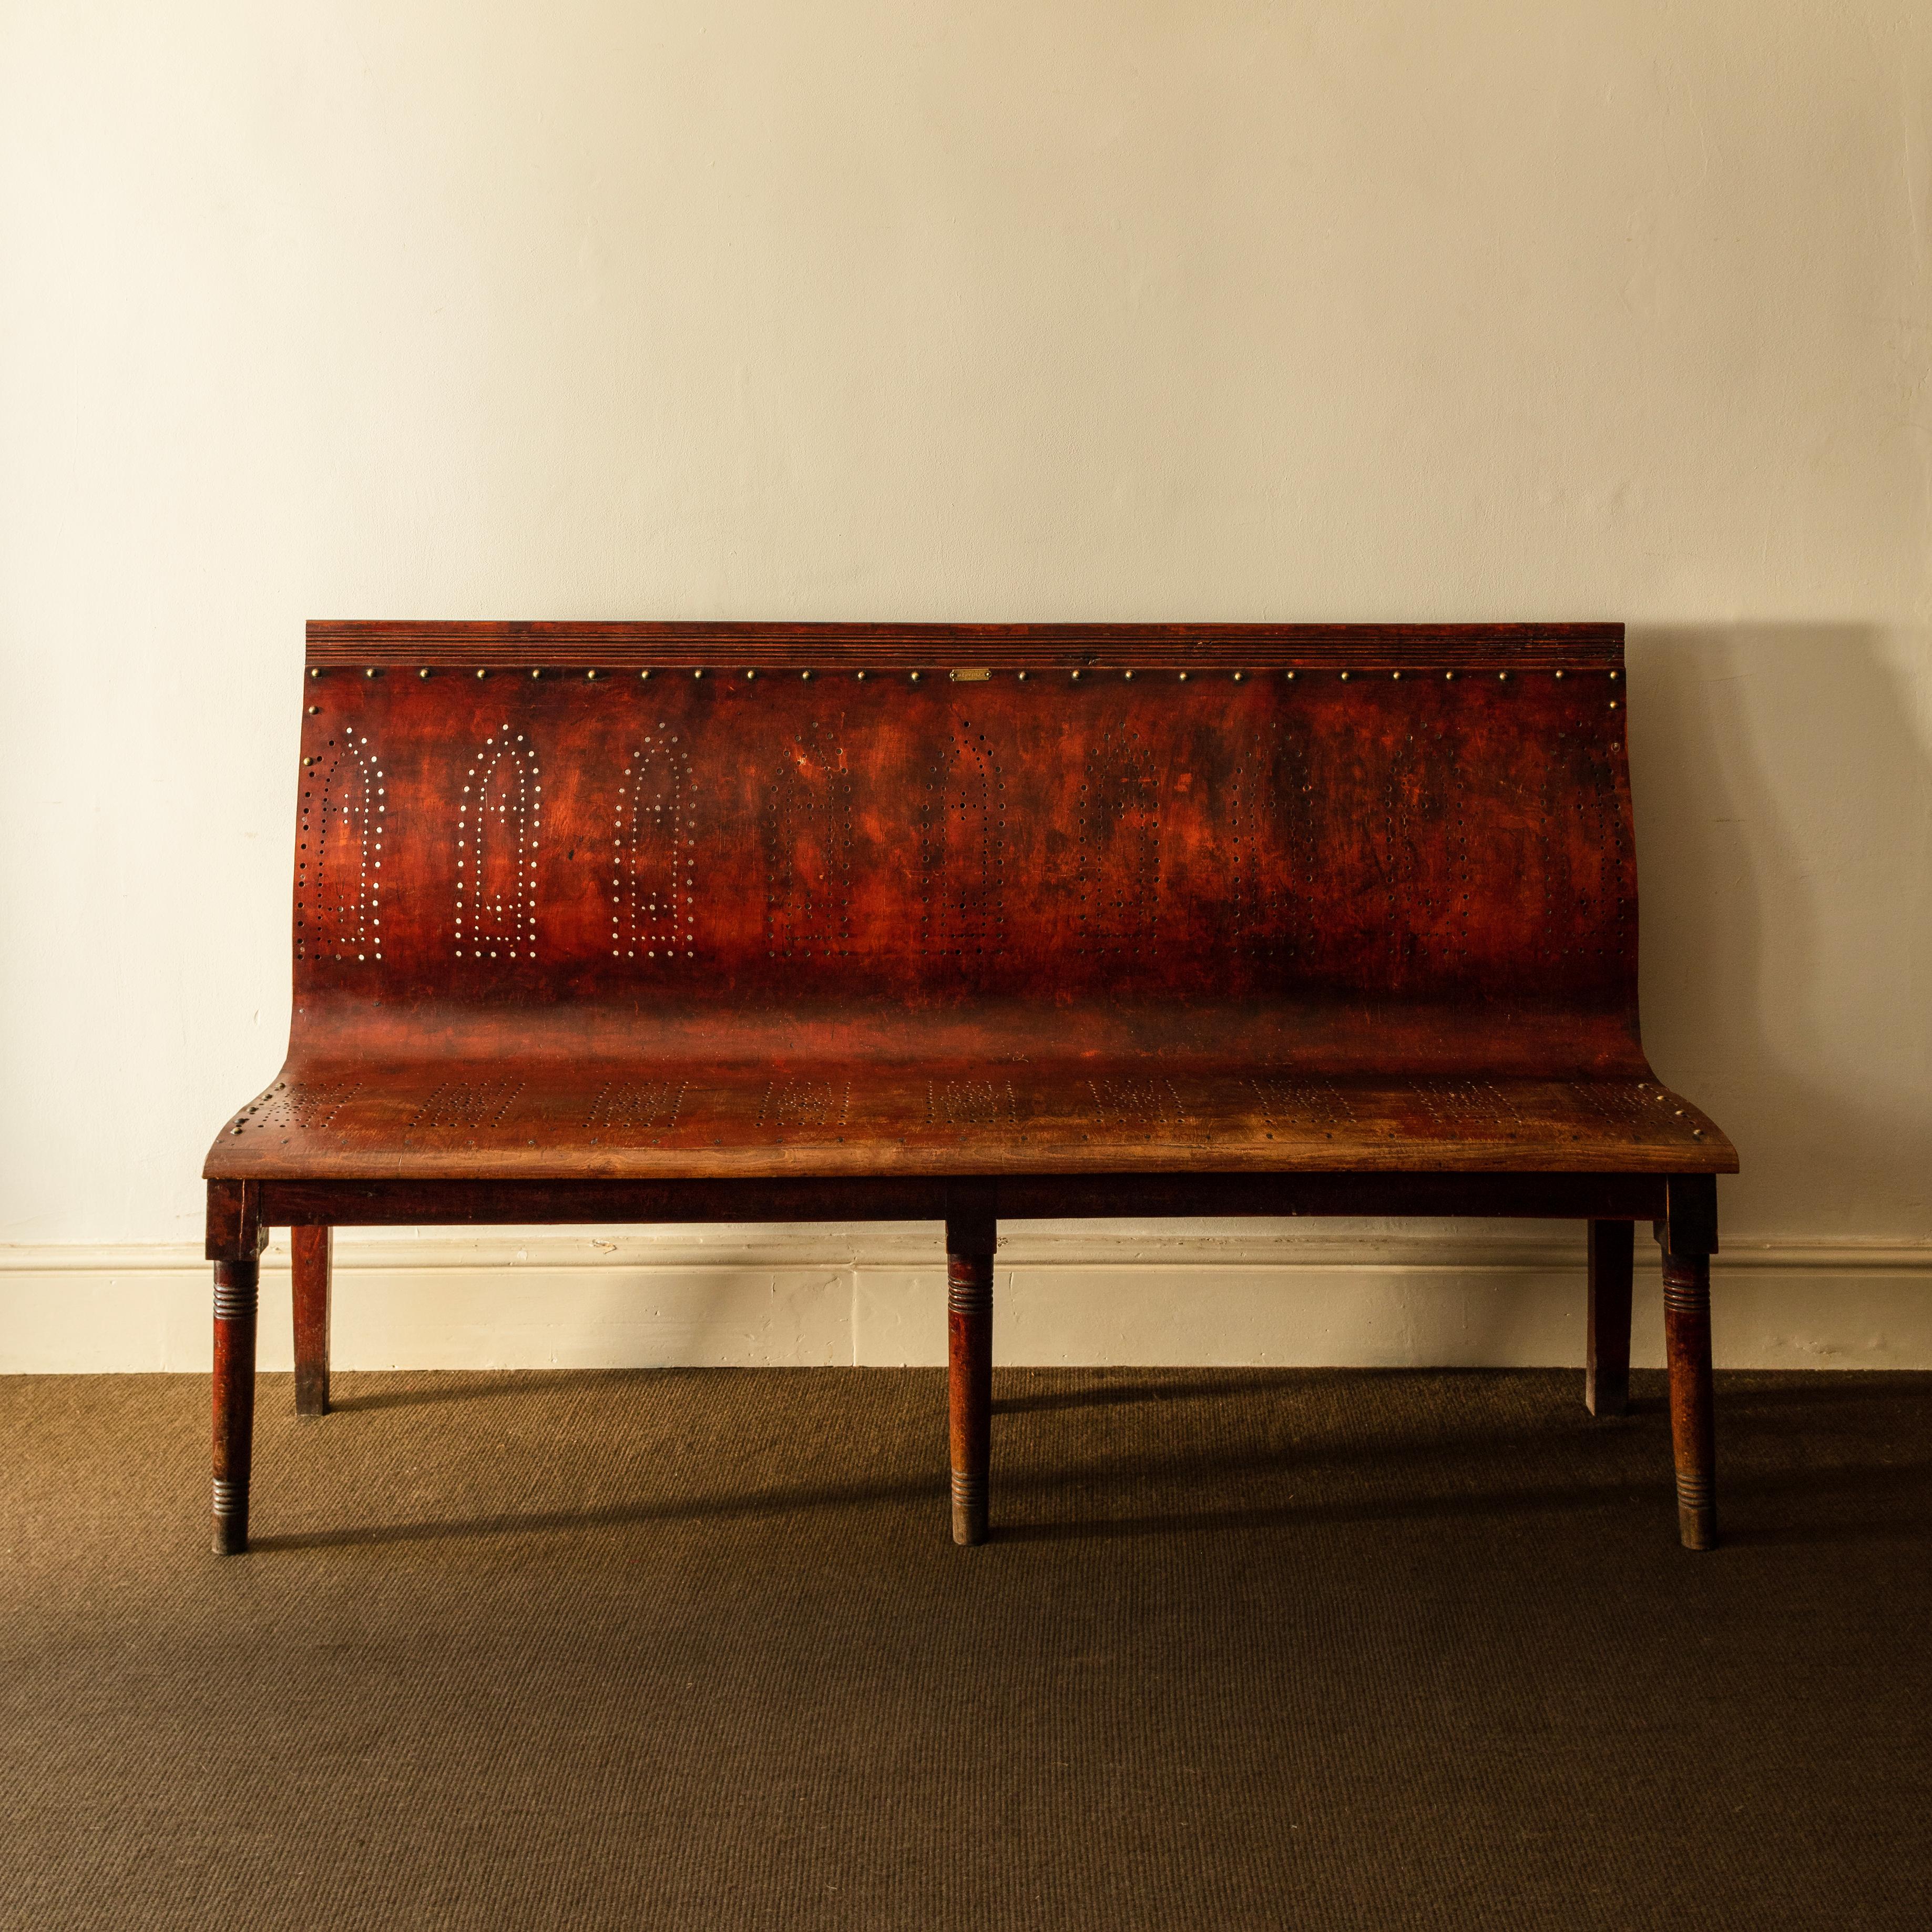 Substantial and comfortable bentwood bench, the seat with a pattern of pierced boxes, the back with a series of gothic arches.

With a small makers label for Cambier Freres, a well respected manufacturer of bentwood utility furniture. Lille,